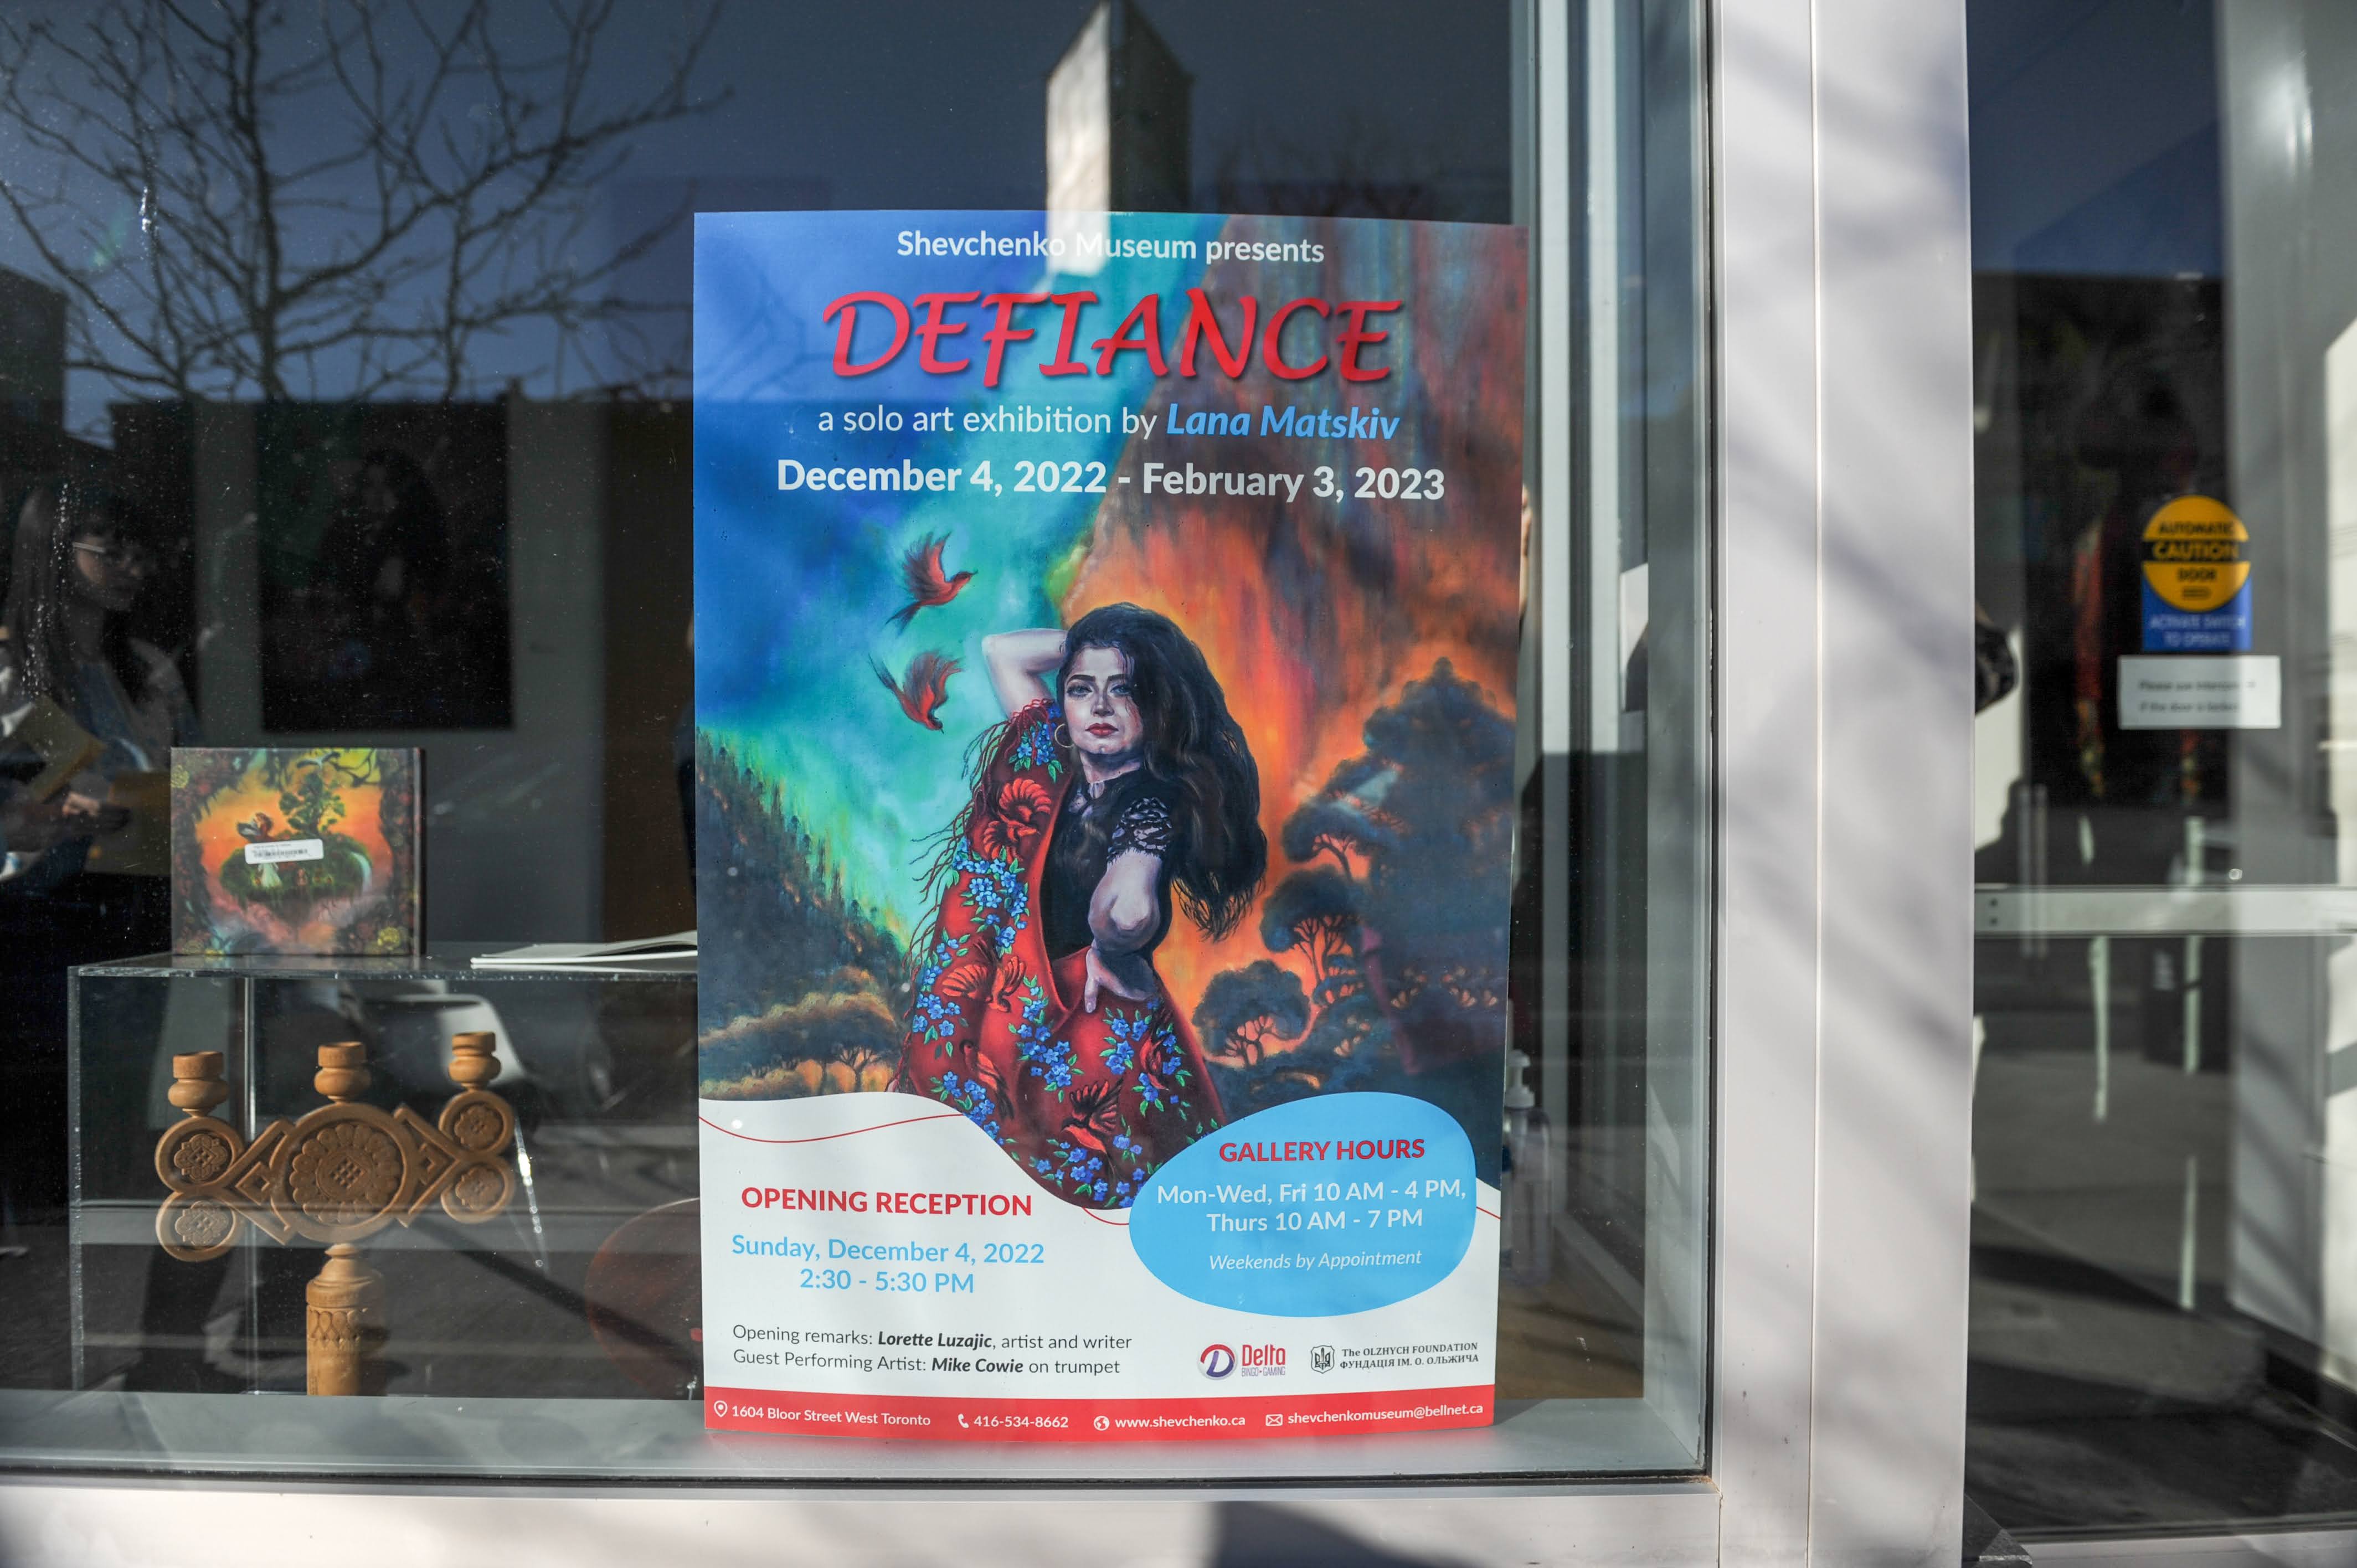 DEFIANCE - exhibition of art and graphics by Lana Matskiv